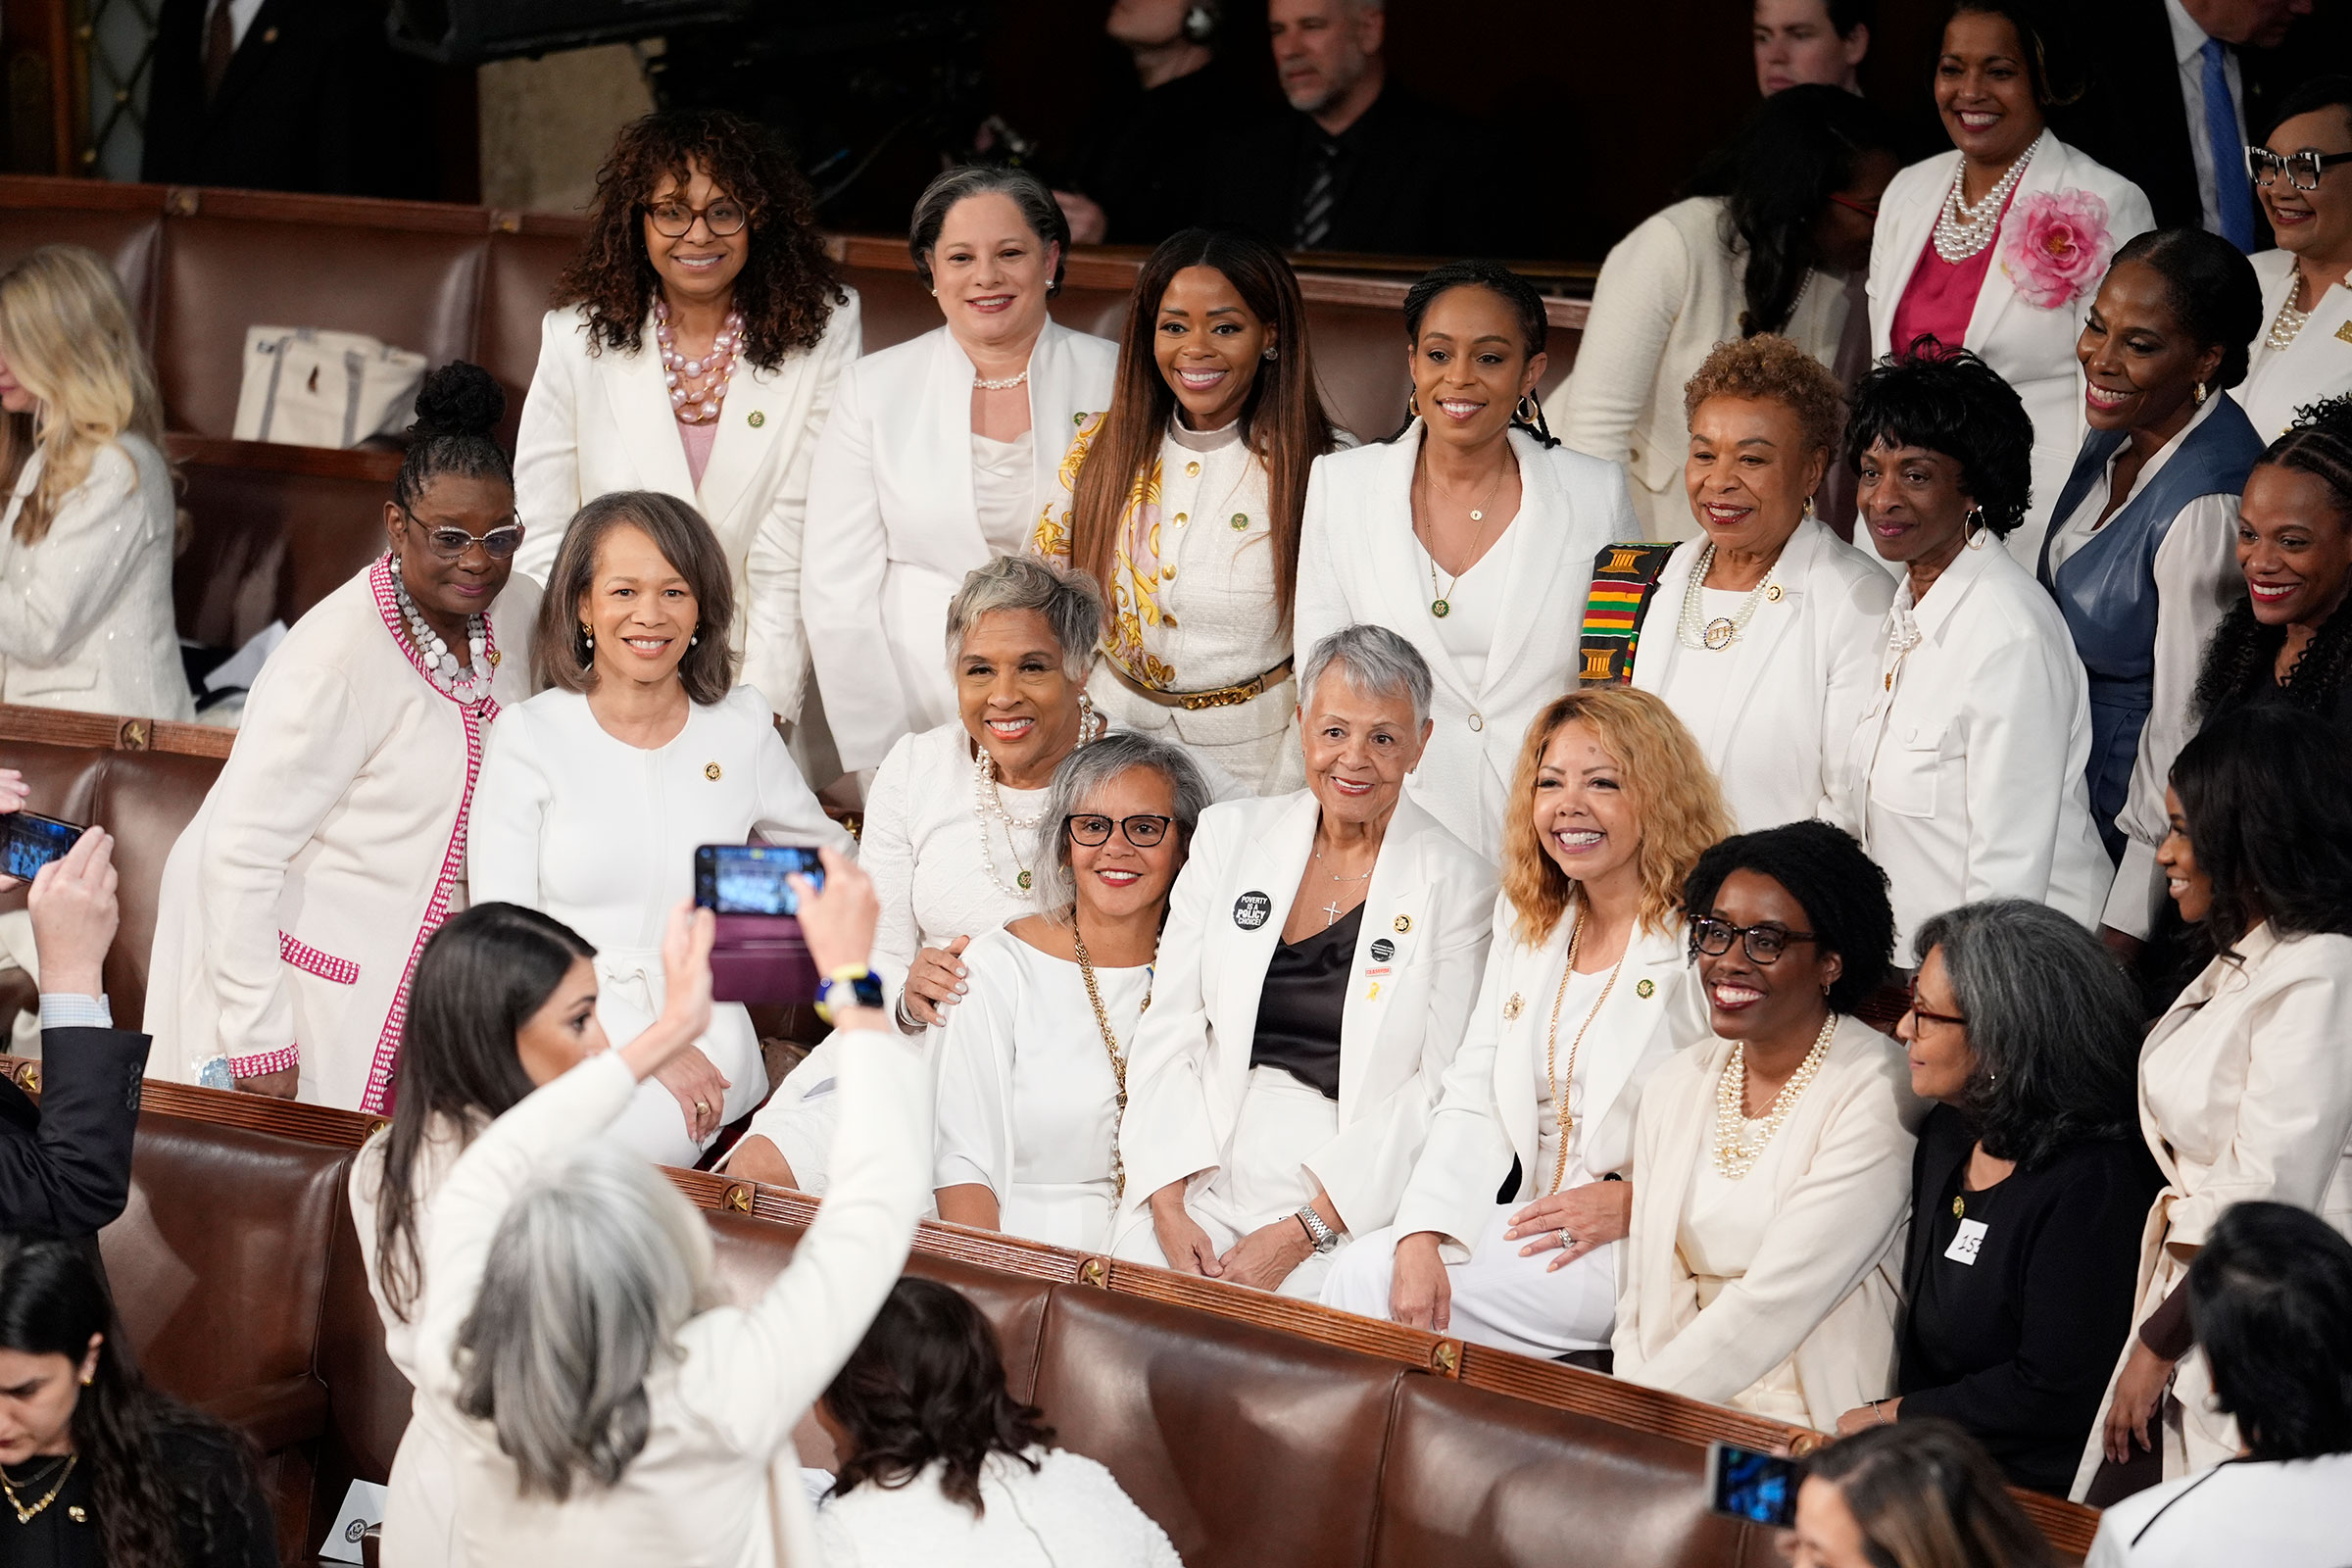 Women members of the House of Representatives pose for photos before President Joe Biden arrives to deliver his State of the Union address to a joint session of Congress, at the Capitol in Washington, DC, on Thursday.